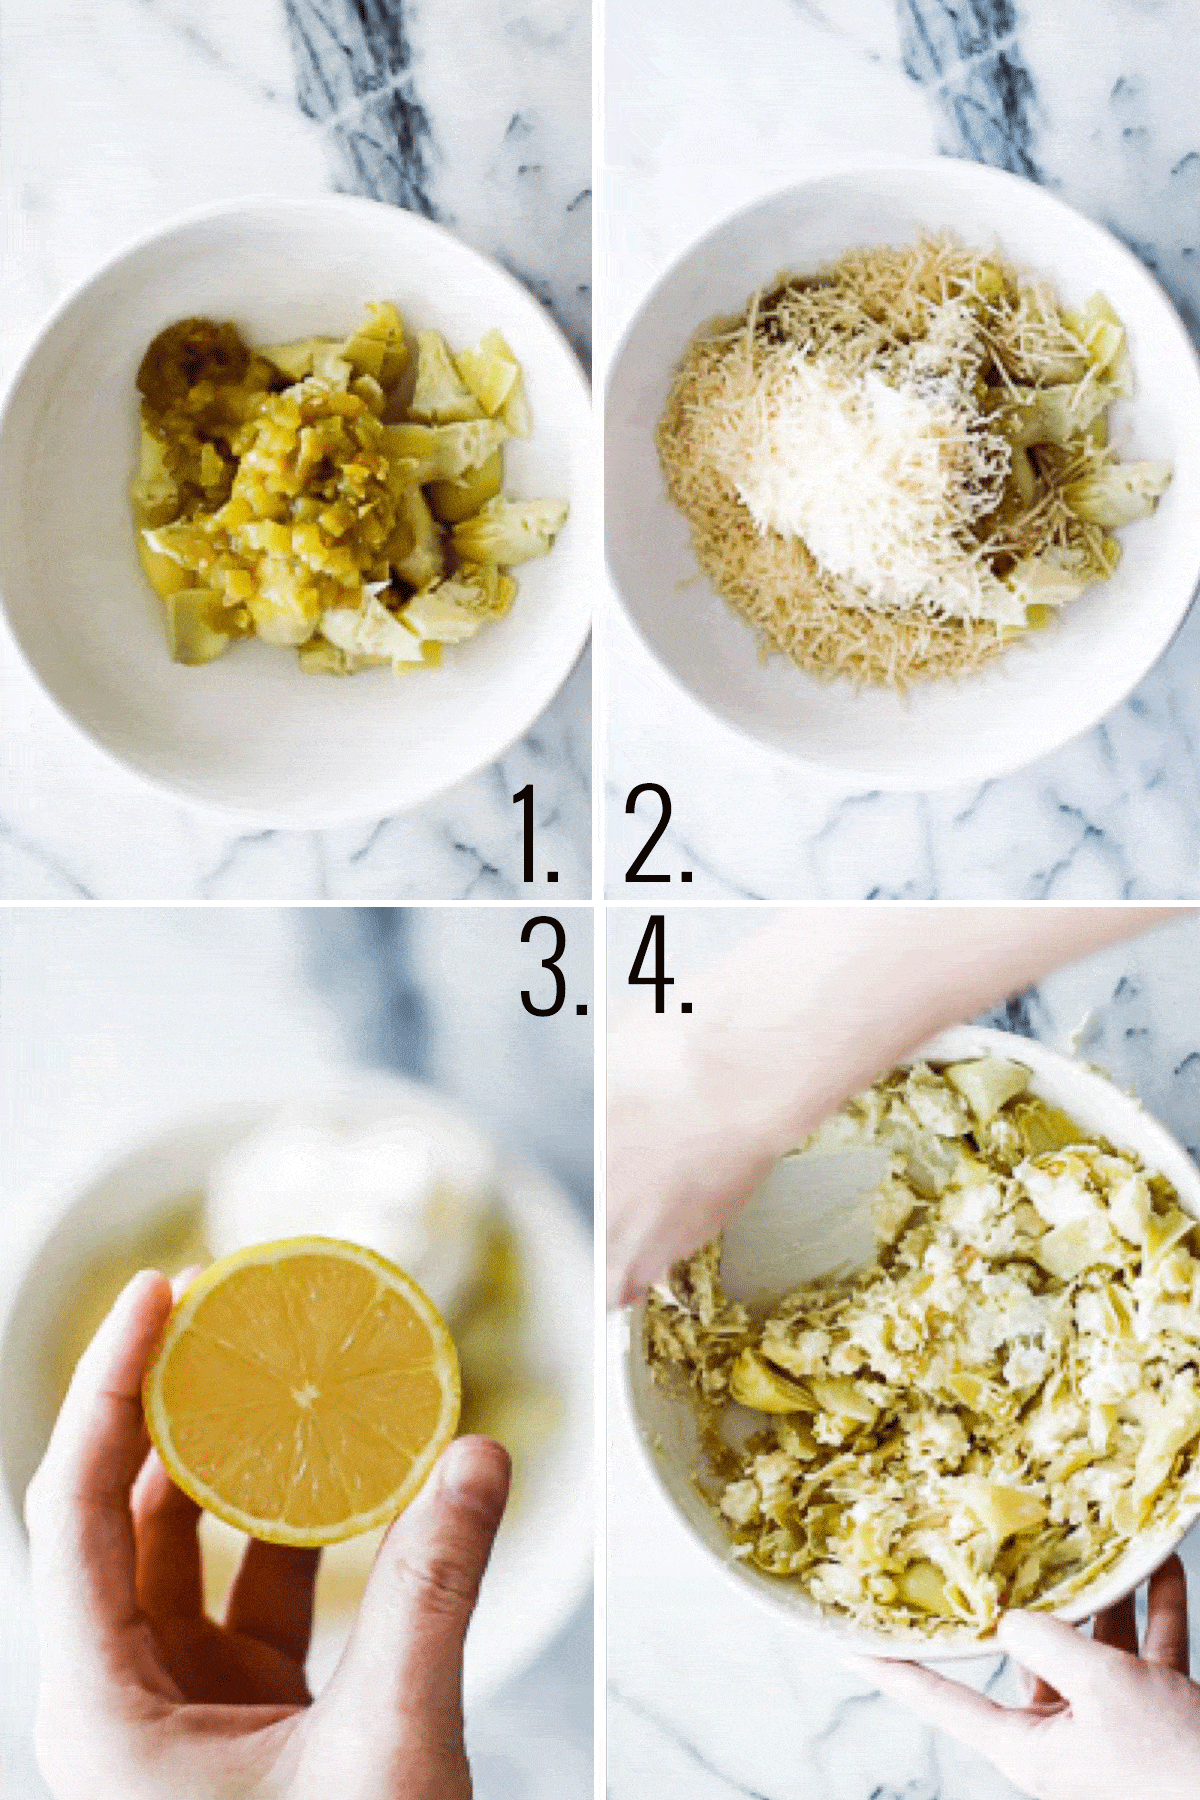 Collage of images showing the steps to make green chile artichoke dip.